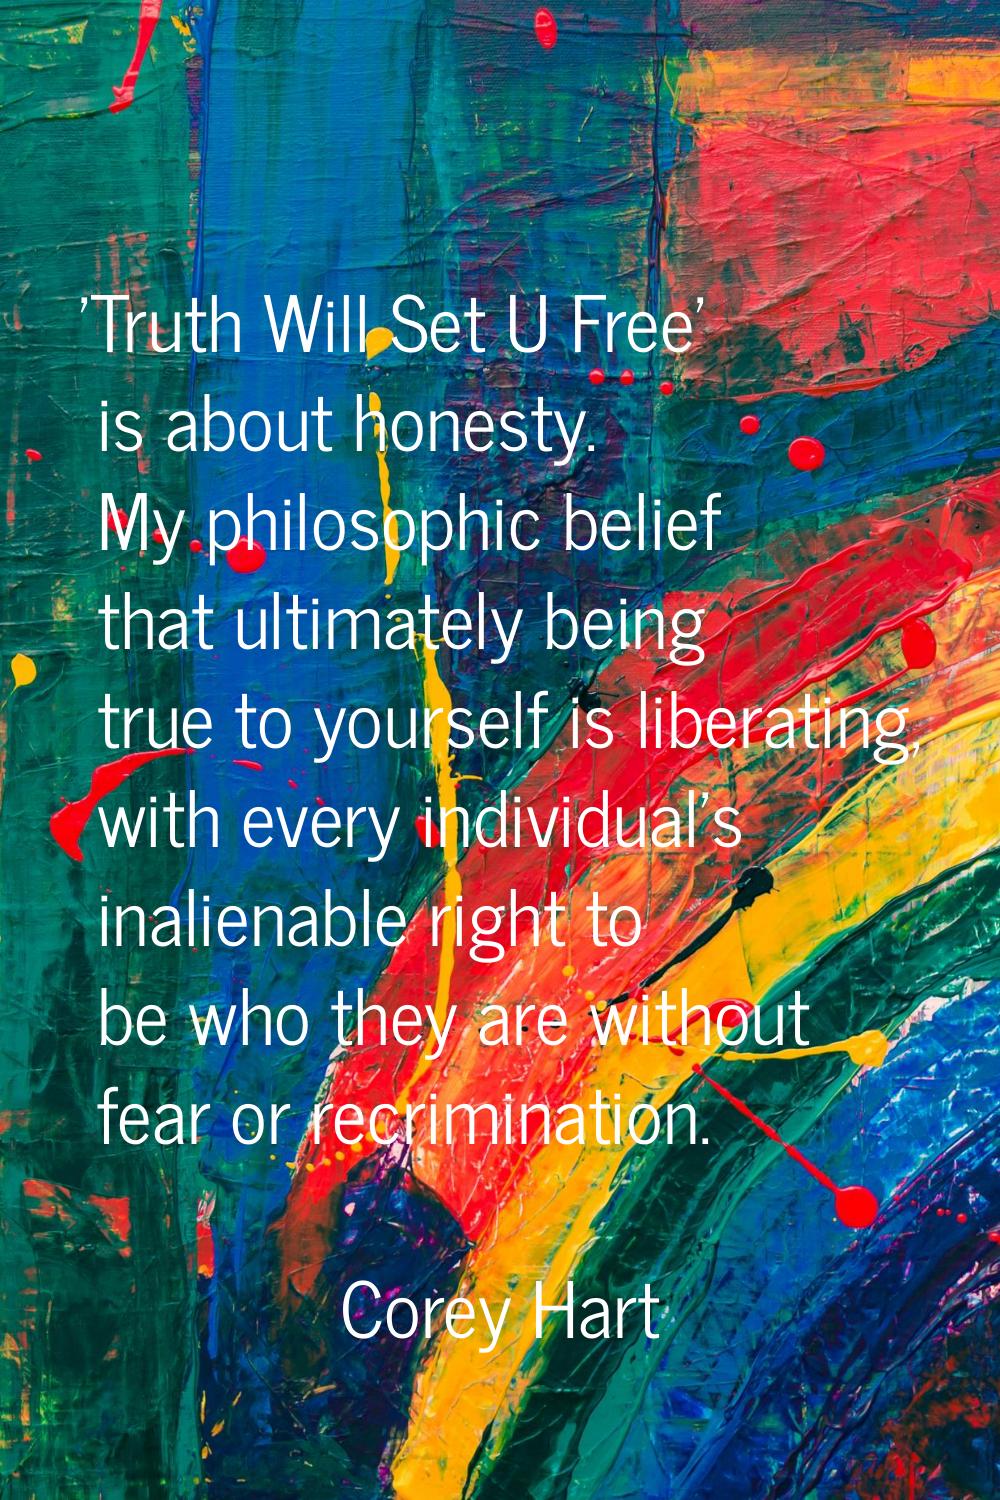 'Truth Will Set U Free' is about honesty. My philosophic belief that ultimately being true to yours